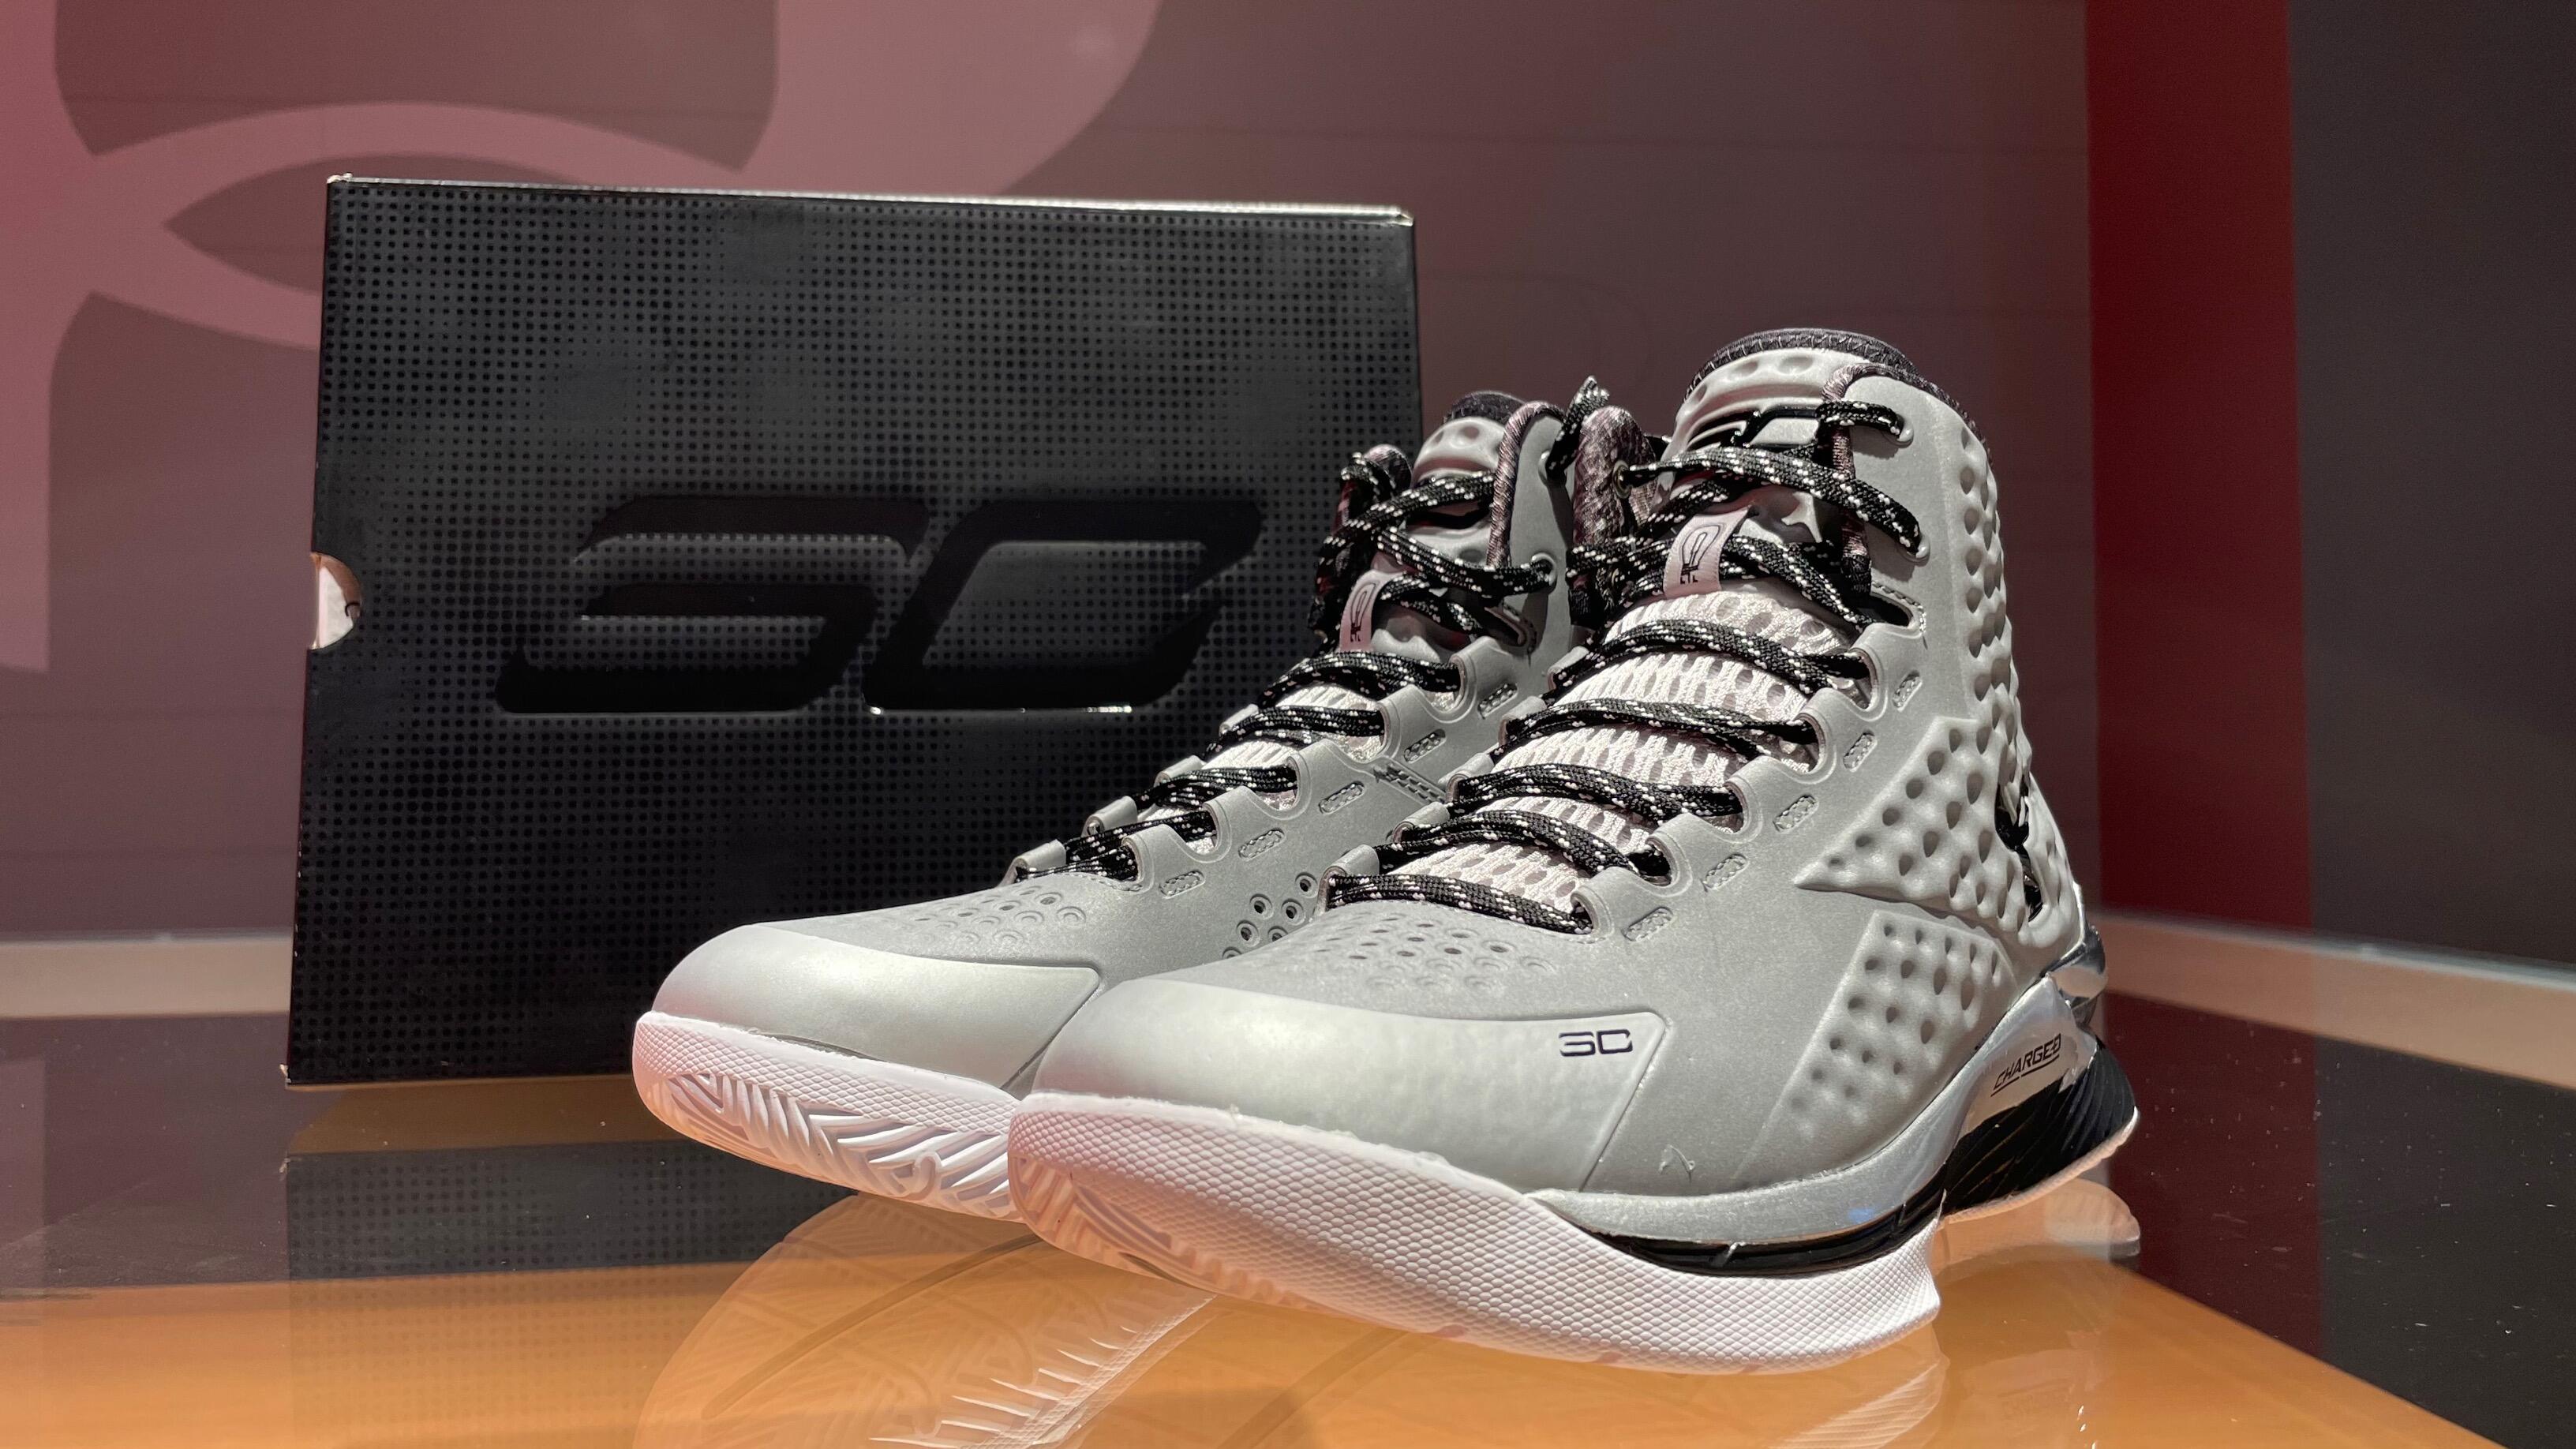 Curry 1 RFLCT | UNDER ARMOUR BRAND HOUSE 新宿 | SHOP BLOG | UNDER ...